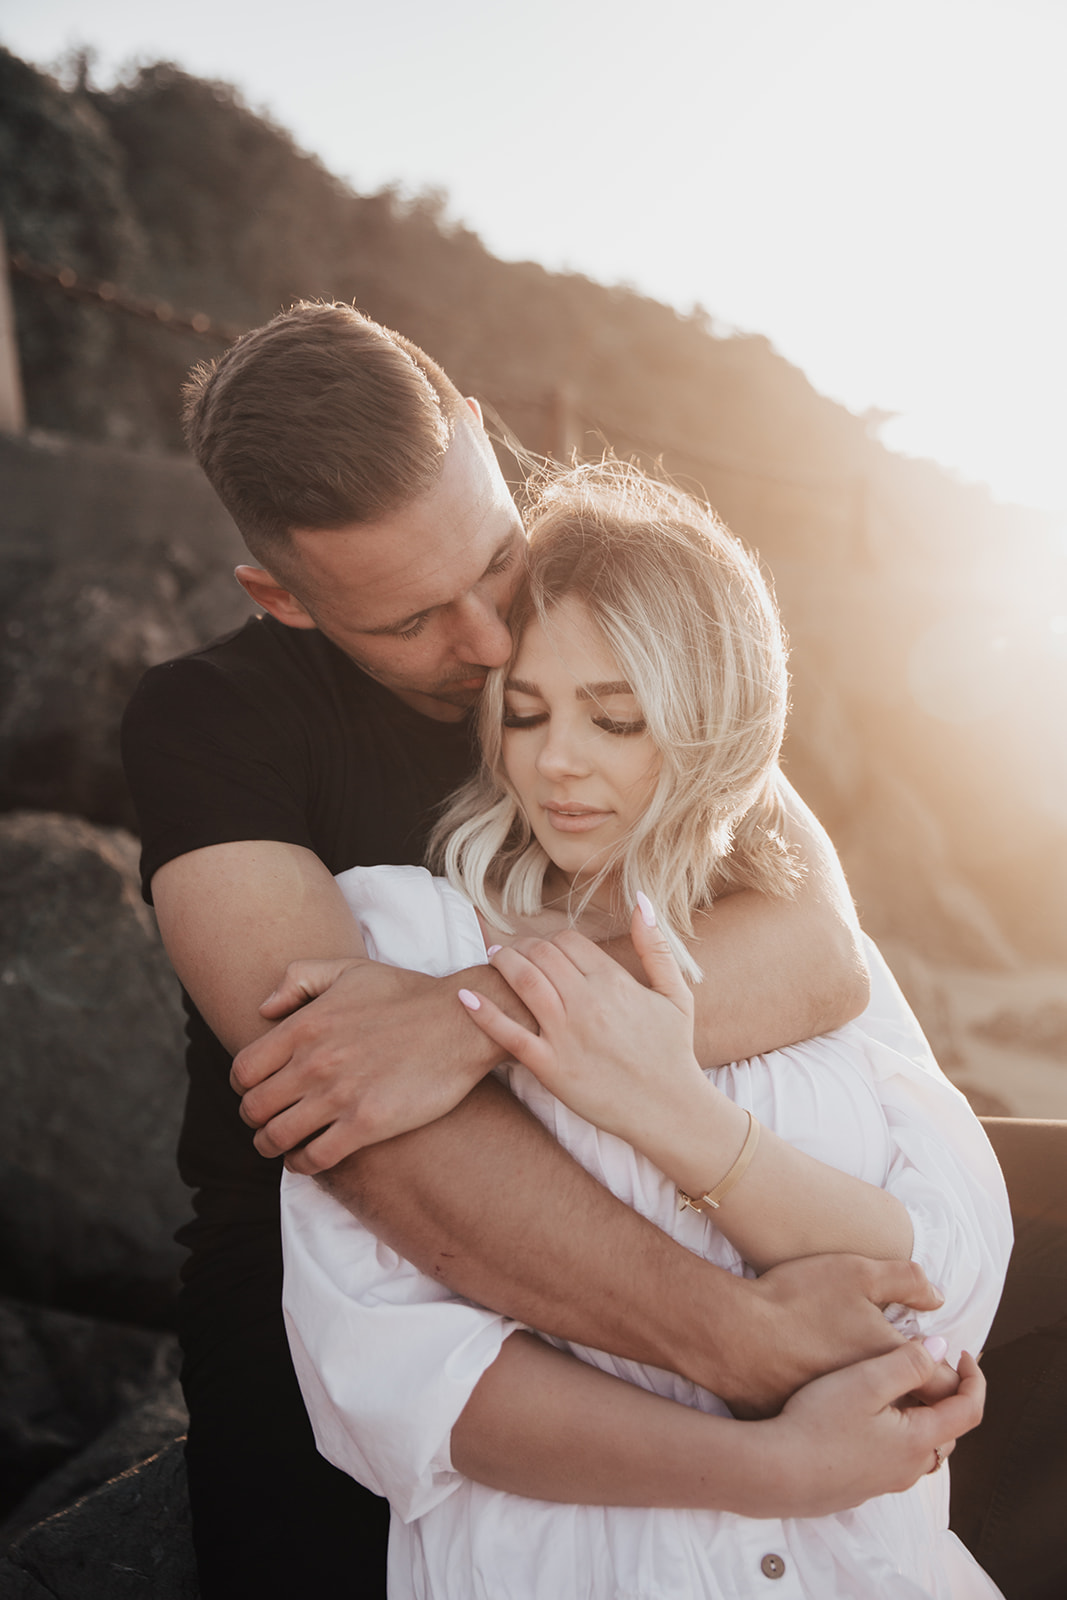 dreamy golden gate engagement. Man wraps arms around woman in white dress with sunset in background